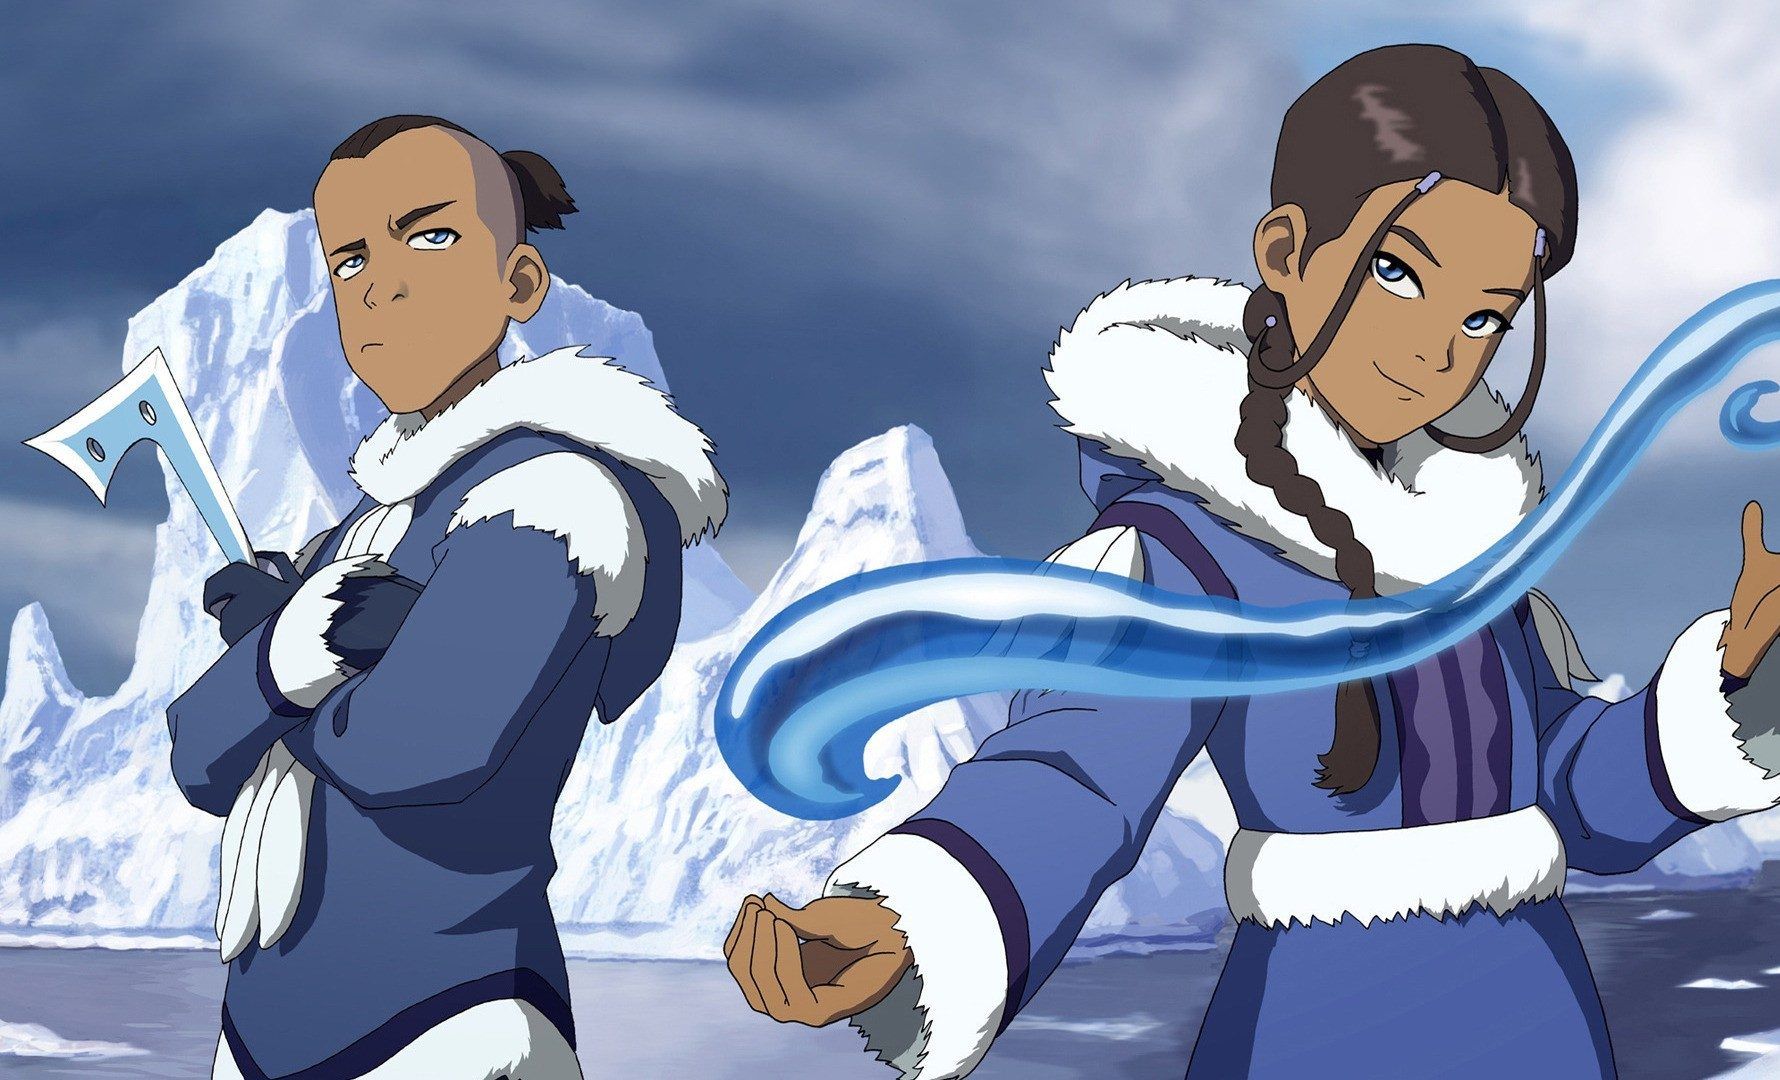 25 Wow Class Facts You Didn’t Know About Avatar The Last Airbender